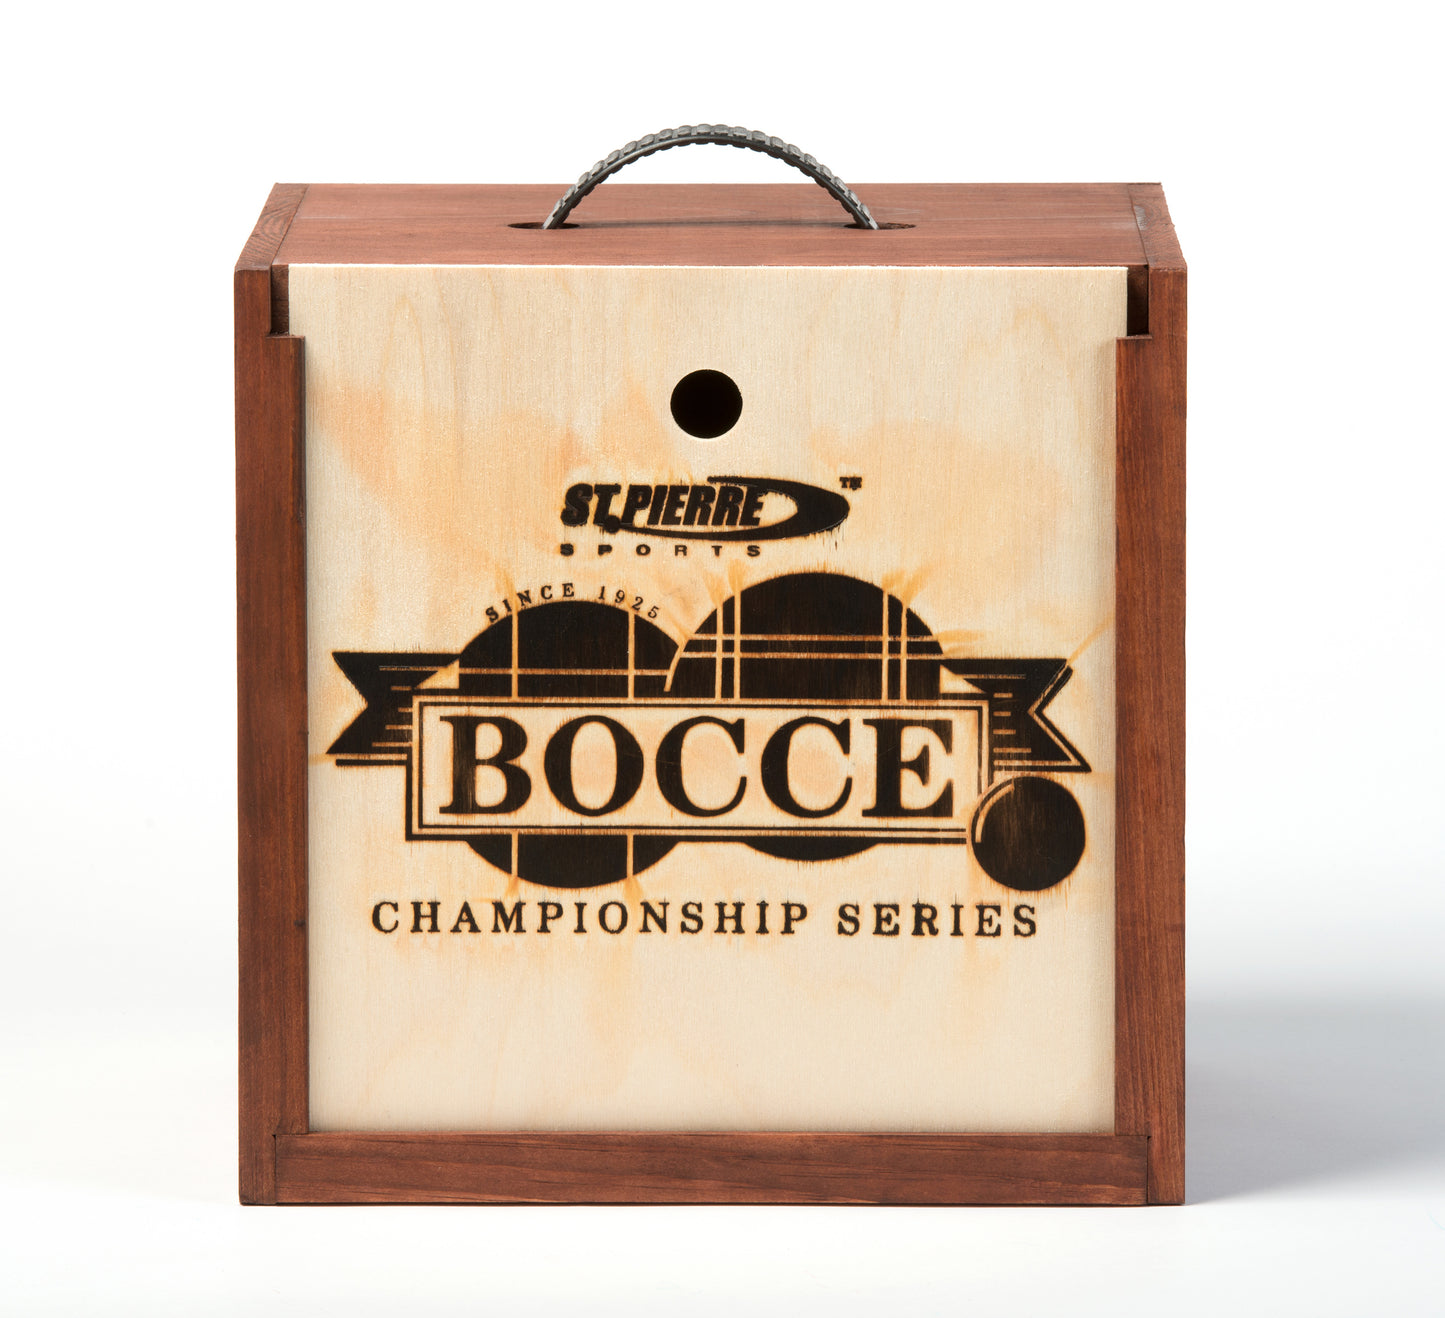 Wood carrying case for bocce balls